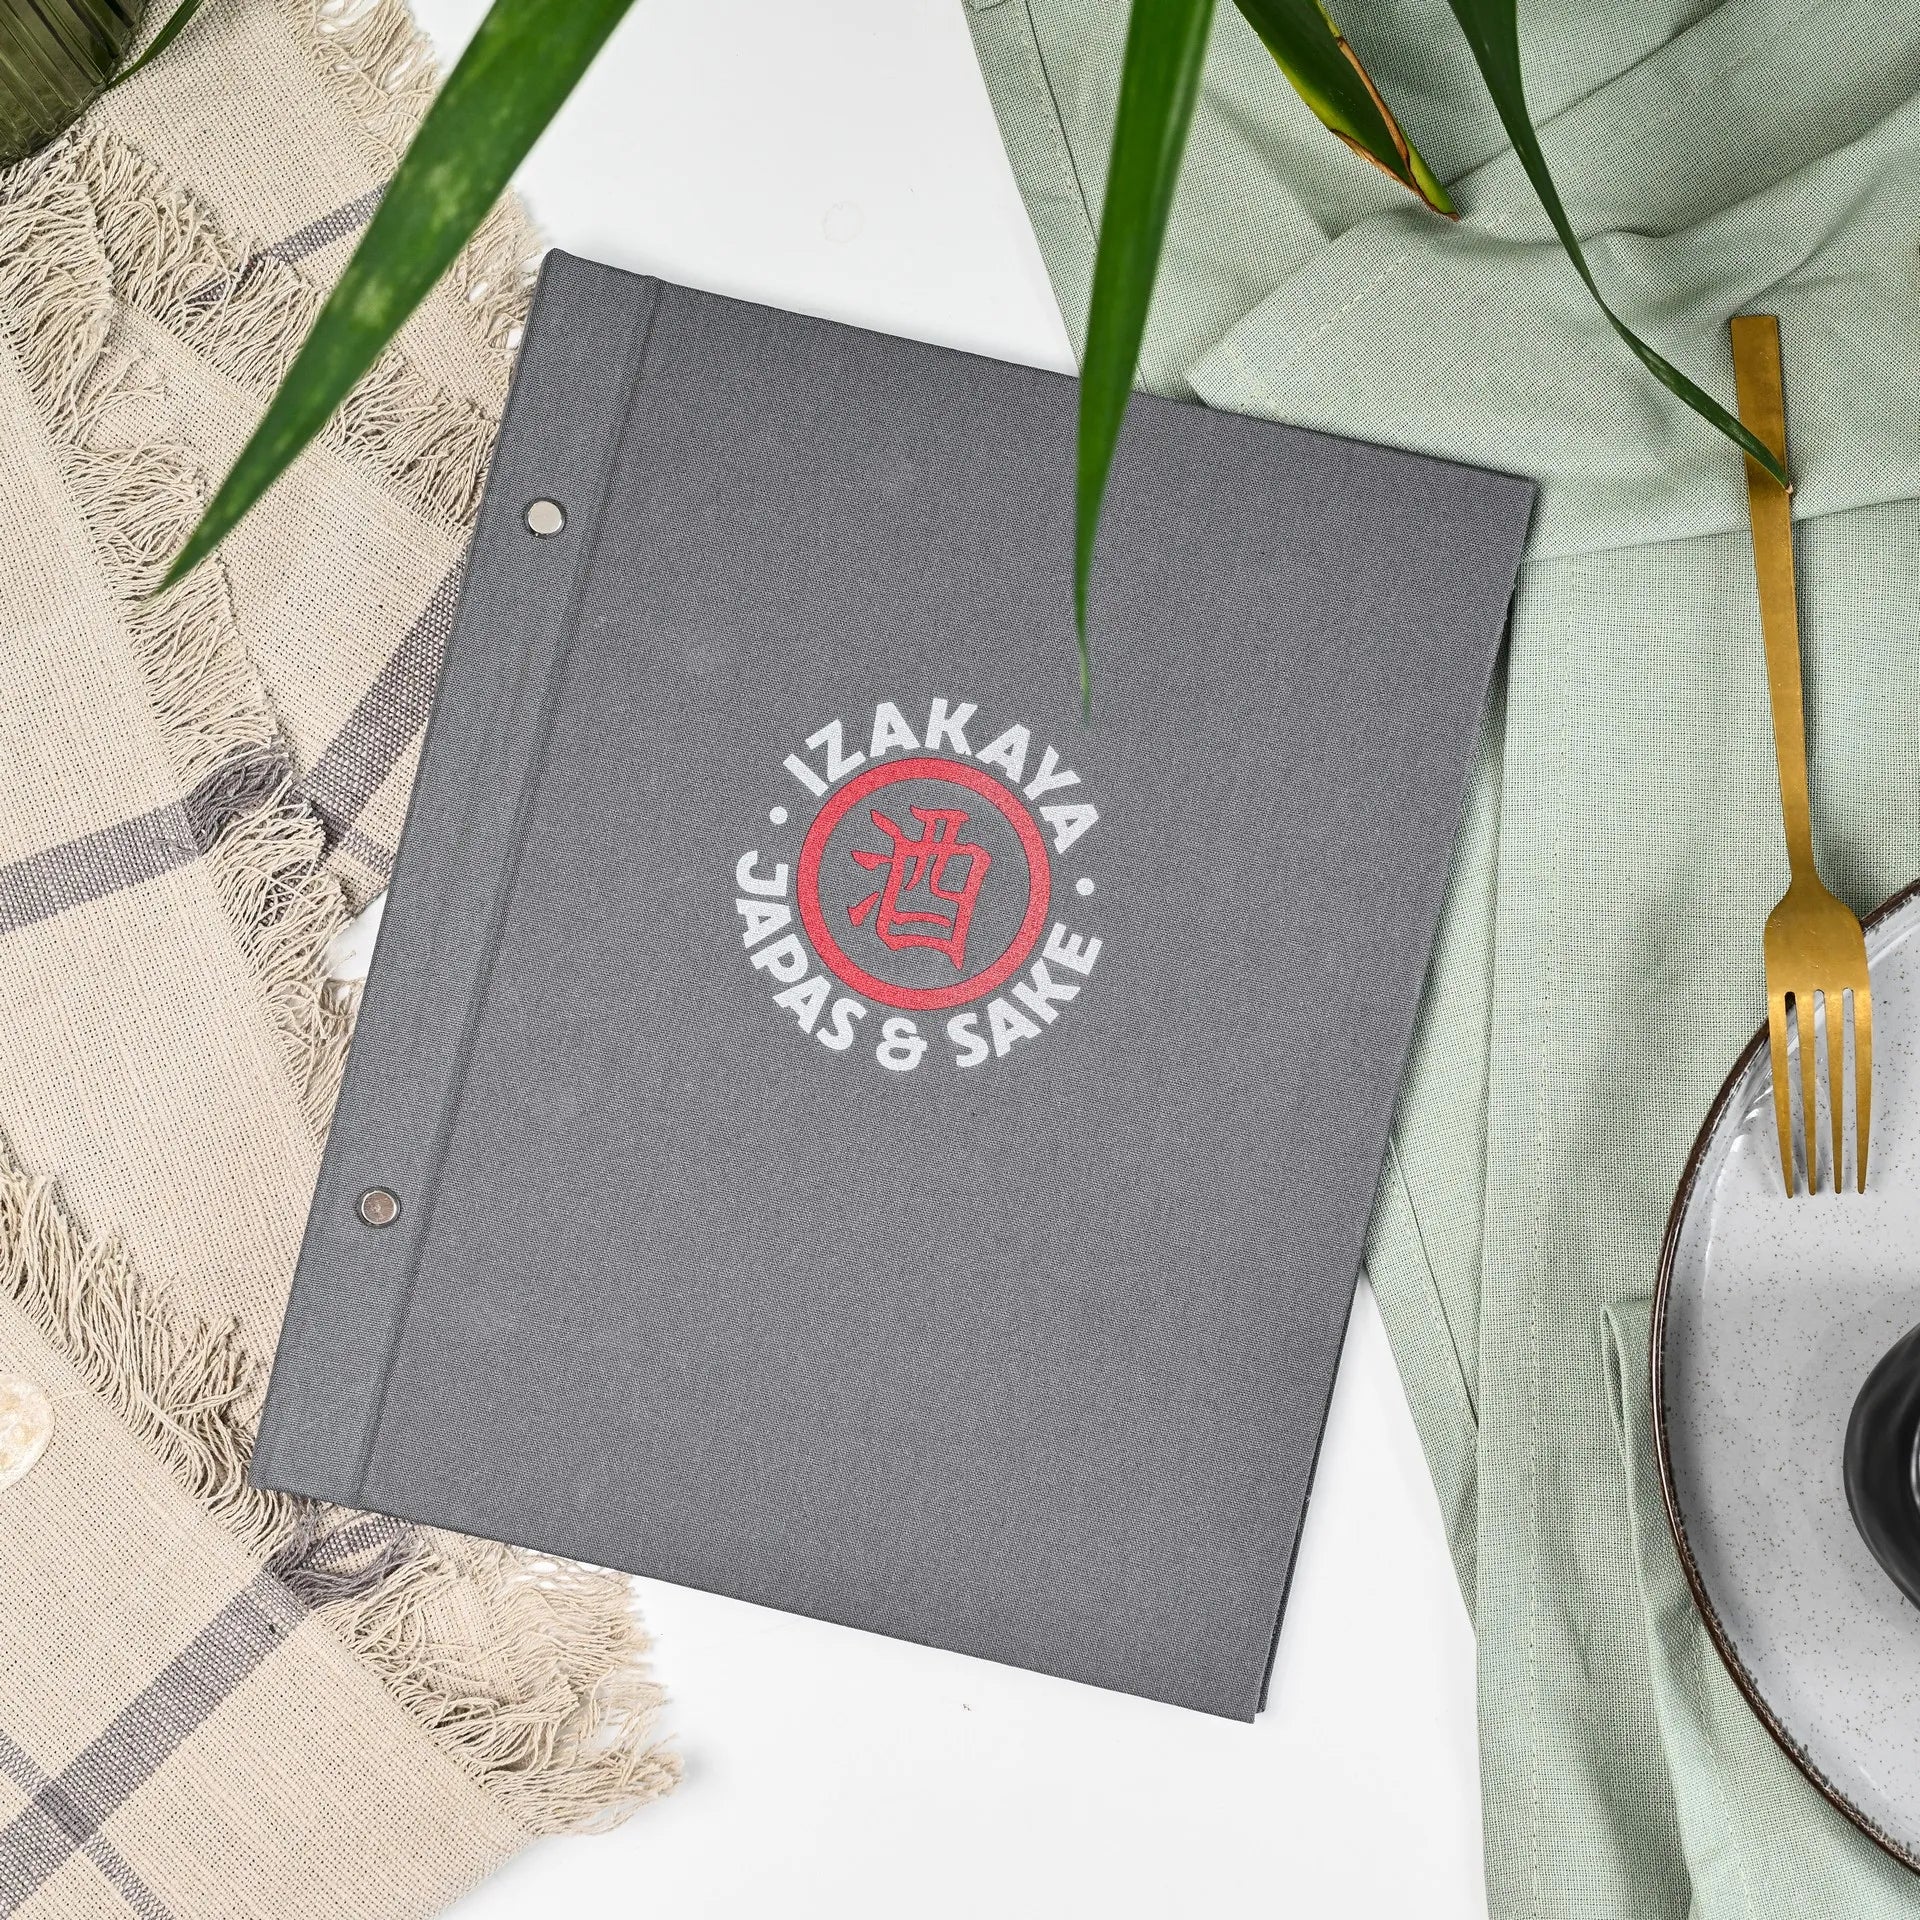 Custom fabric menu folder with logo, ideal for restaurants. Durable cover and changeable sheets make updating your drink menu easy and stylish.